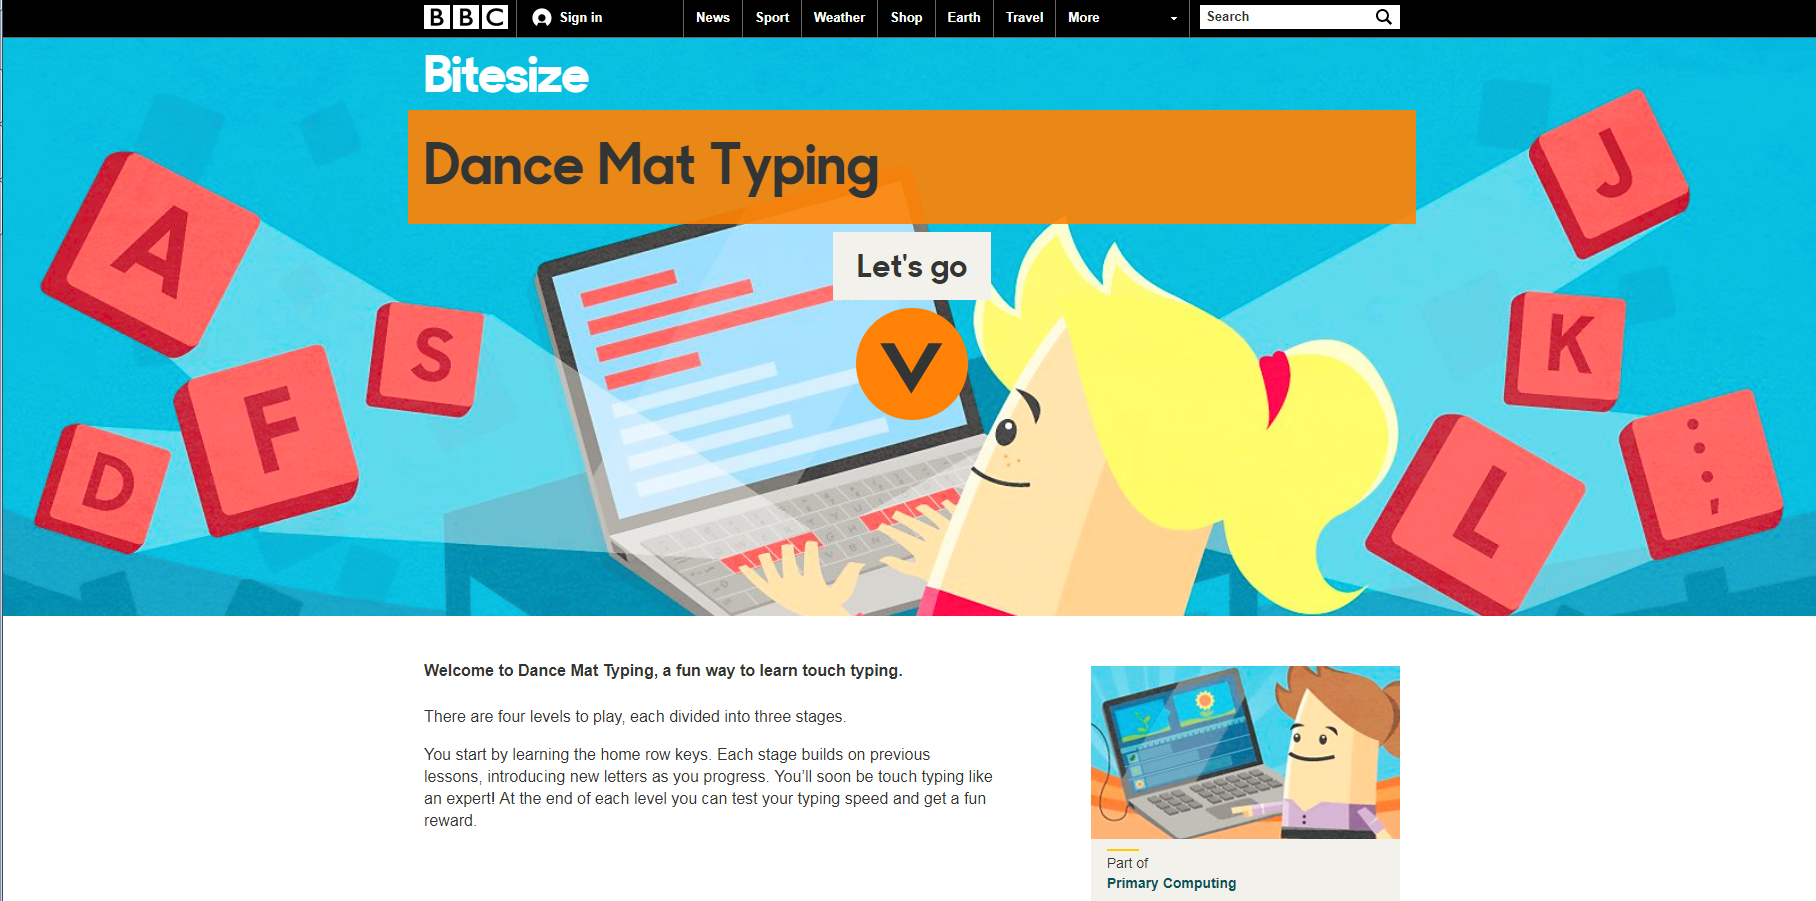 DANCE MAT TYPING BBC LEVEL 1 TO 5